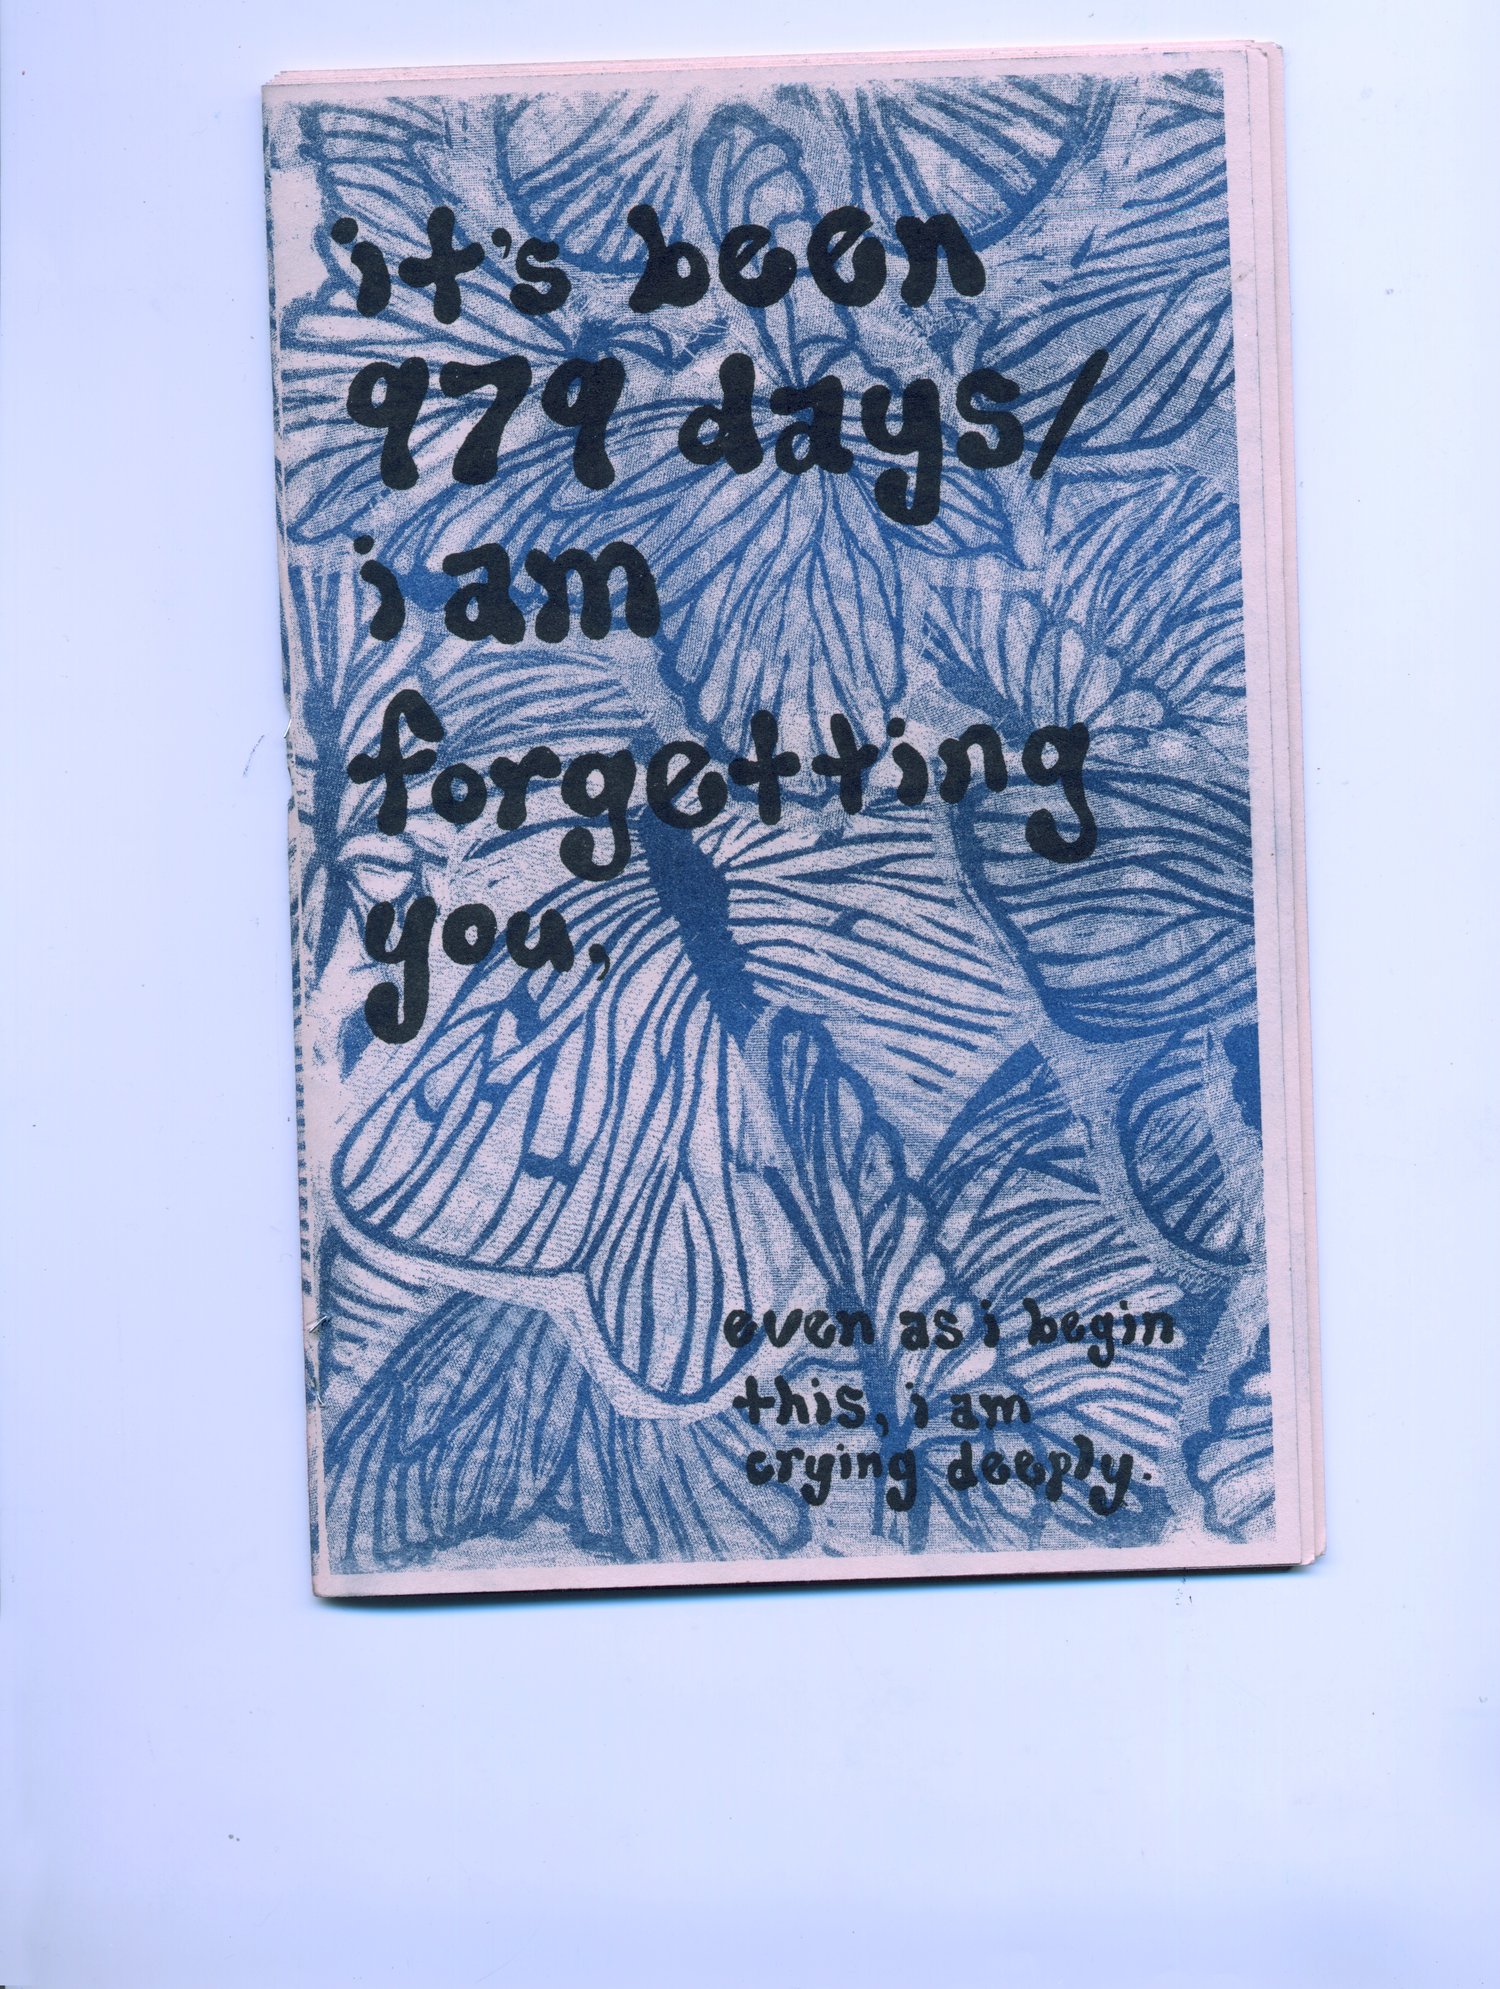 Image of it's been 979 days / i am forgetting you, even as i begin this i am crying deeply. (zine)